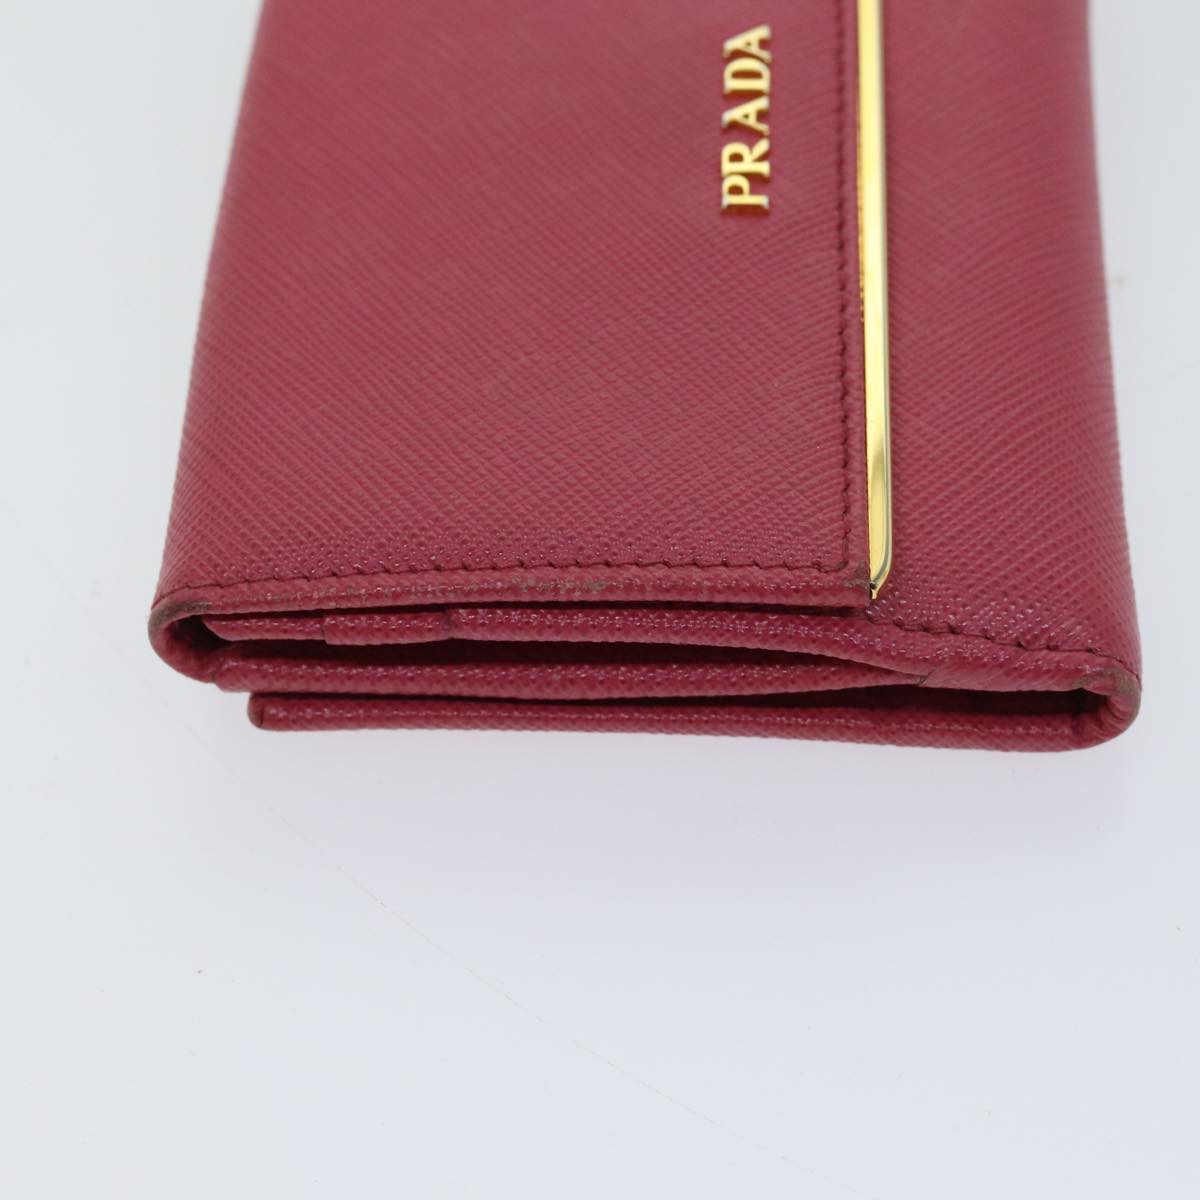 PRADA Wallet Safiano leather Pink Auth 70786